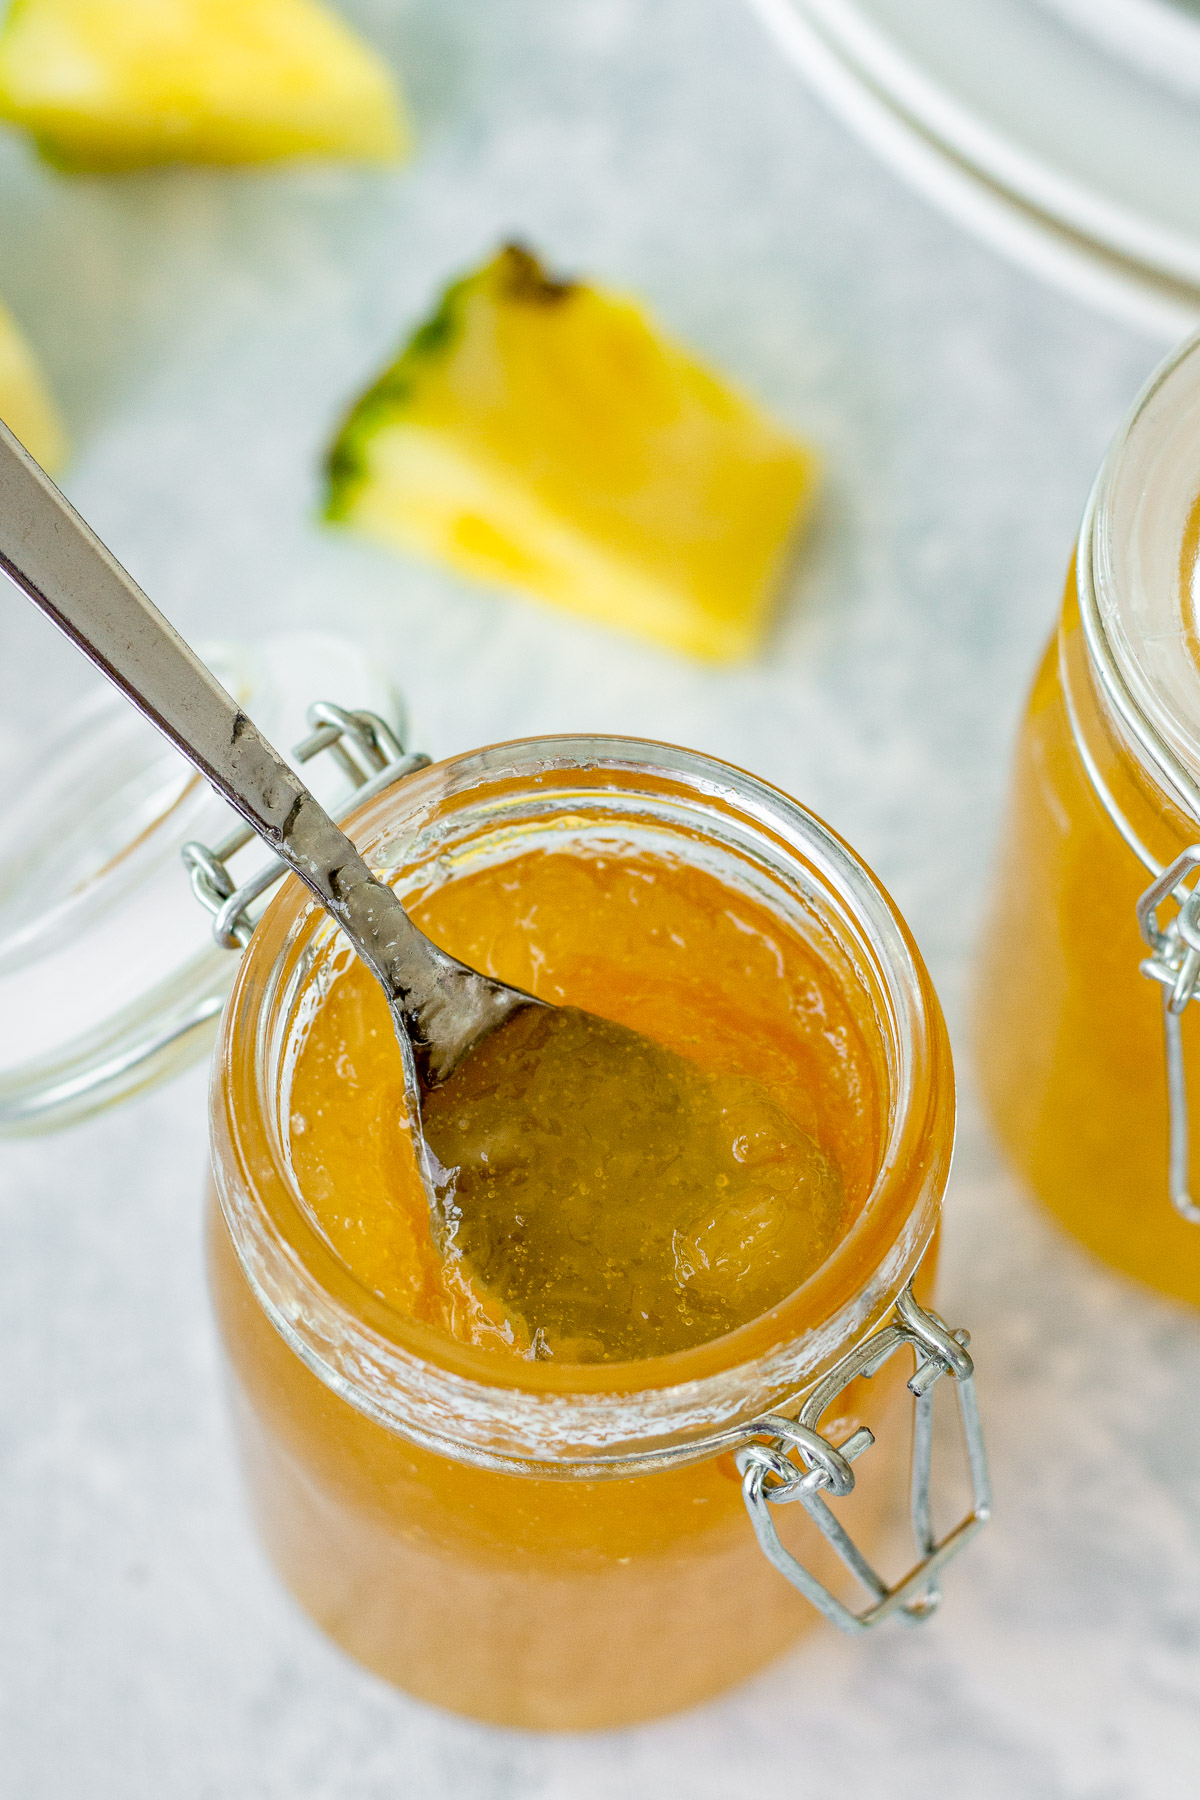 pineapple jam in a glass jar with a wedge of pineapple in the background